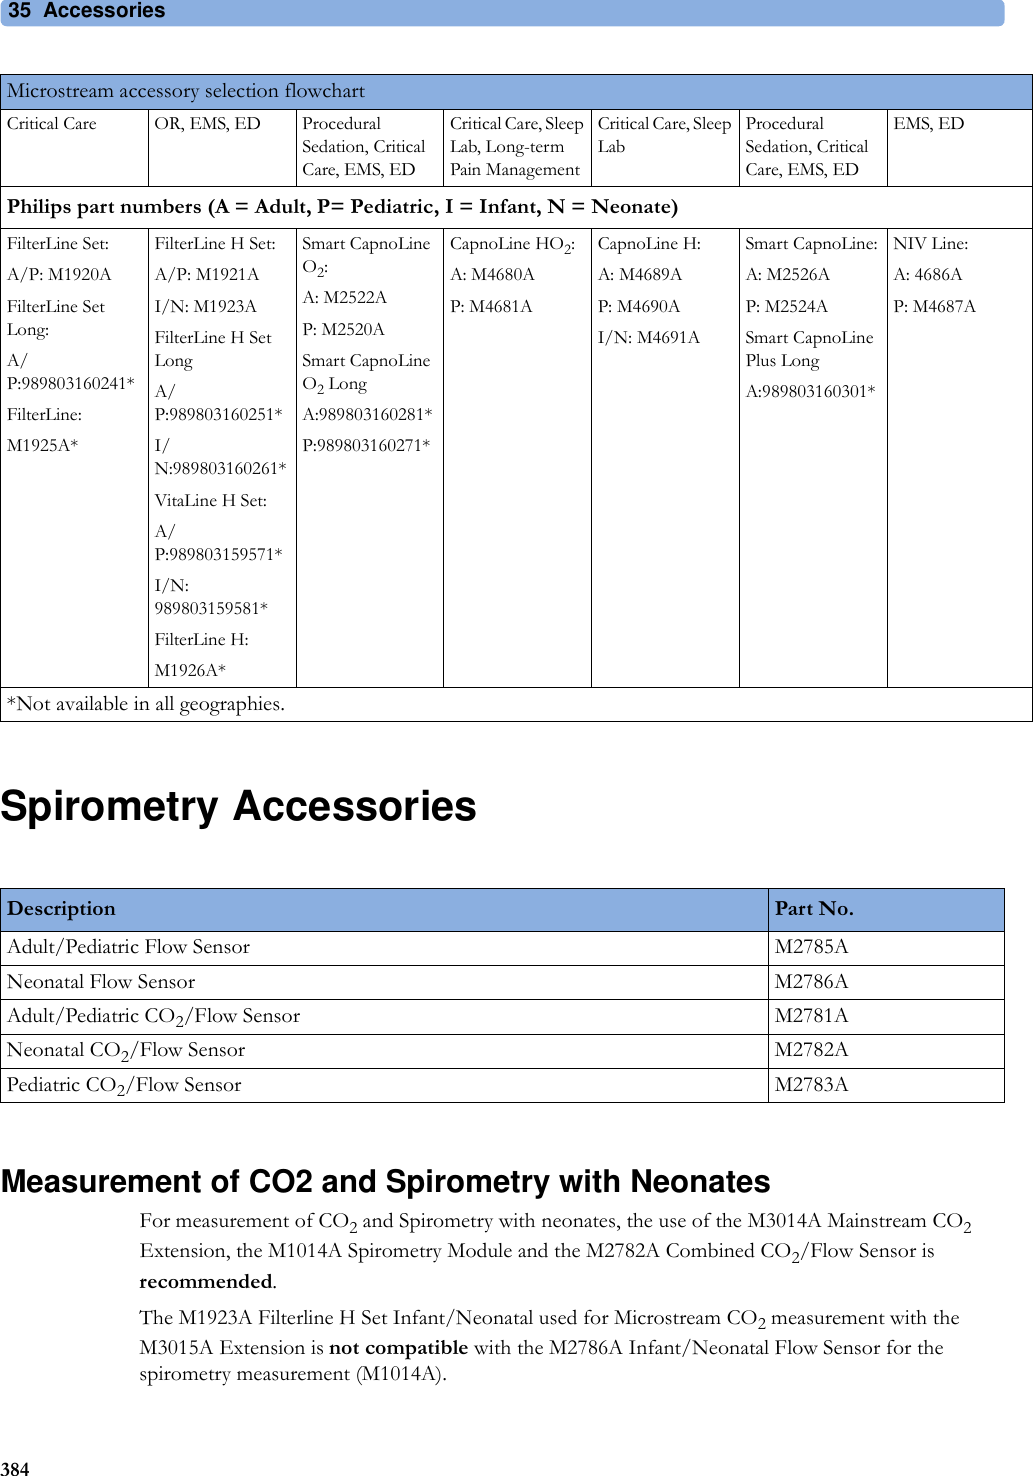 35 Accessories384Spirometry AccessoriesMeasurement of CO2 and Spirometry with NeonatesFor measurement of CO2 and Spirometry with neonates, the use of the M3014A Mainstream CO2 Extension, the M1014A Spirometry Module and the M2782A Combined CO2/Flow Sensor is recommended.The M1923A Filterline H Set Infant/Neonatal used for Microstream CO2 measurement with the M3015A Extension is not compatible with the M2786A Infant/Neonatal Flow Sensor for the spirometry measurement (M1014A).Critical Care OR, EMS, ED Procedural Sedation, Critical Care, EMS, EDCritical Care, Sleep Lab, Long-term Pain ManagementCritical Care, Sleep LabProcedural Sedation, Critical Care, EMS, EDEMS, EDPhilips part numbers (A = Adult, P= Pediatric, I = Infant, N = Neonate)FilterLine Set:A/P: M1920AFilterLine Set Long:A/P:989803160241*FilterLine:M1925A*FilterLine H Set:A/P: M1921AI/N: M1923AFilterLine H Set LongA/P:989803160251*I/N:989803160261*VitaLine H Set:A/P:989803159571*I/N: 989803159581*FilterLine H:M1926A*Smart CapnoLine O2:A: M2522AP: M2520ASmart CapnoLine O2 LongA:989803160281*P:989803160271*CapnoLine HO2:A: M4680AP: M4681ACapnoLine H:A: M4689AP: M4690AI/N: M4691ASmart CapnoLine:A: M2526AP: M2524ASmart CapnoLine Plus LongA:989803160301*NIV Line:A: 4686AP: M4687A*Not available in all geographies.Microstream accessory selection flowchartDescription Part No.Adult/Pediatric Flow Sensor M2785ANeonatal Flow Sensor M2786AAdult/Pediatric CO2/Flow Sensor M2781ANeonatal CO2/Flow Sensor M2782APediatric CO2/Flow Sensor M2783A